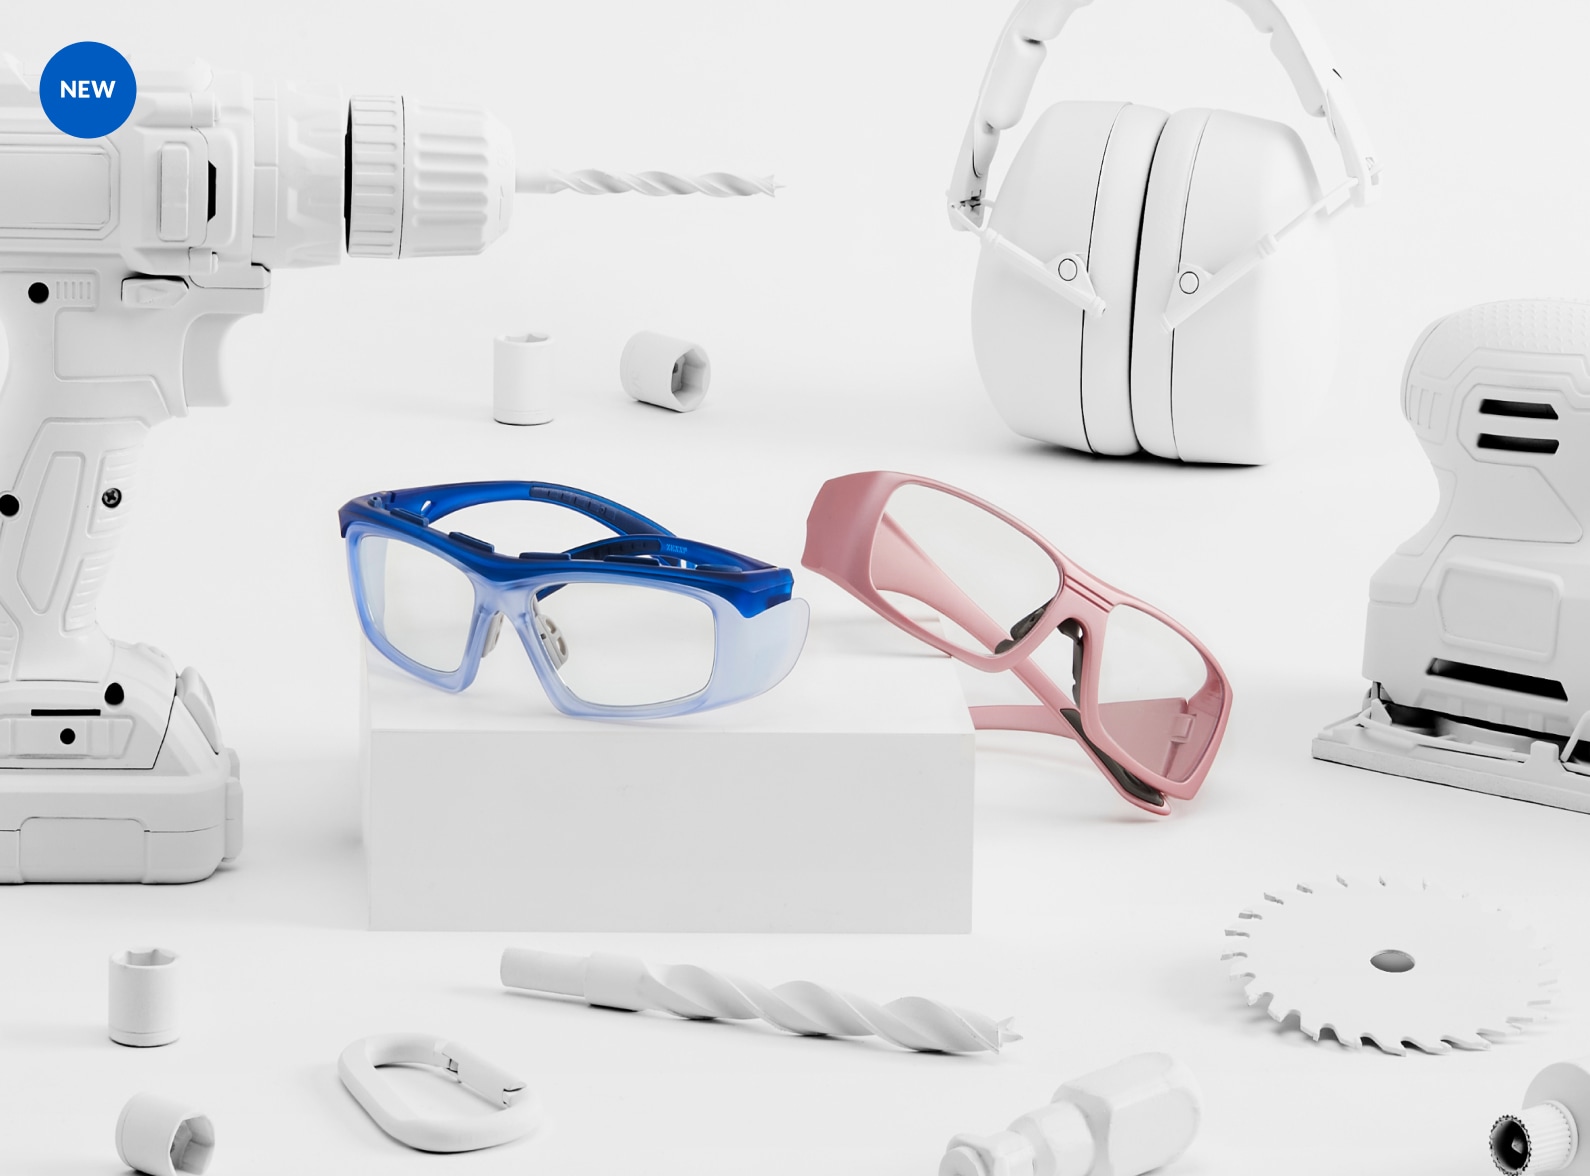 New. Image of Zenni Z87.1 safety glasses #748916 and #749119 on a white platform, surrounded by tools that are painted white.